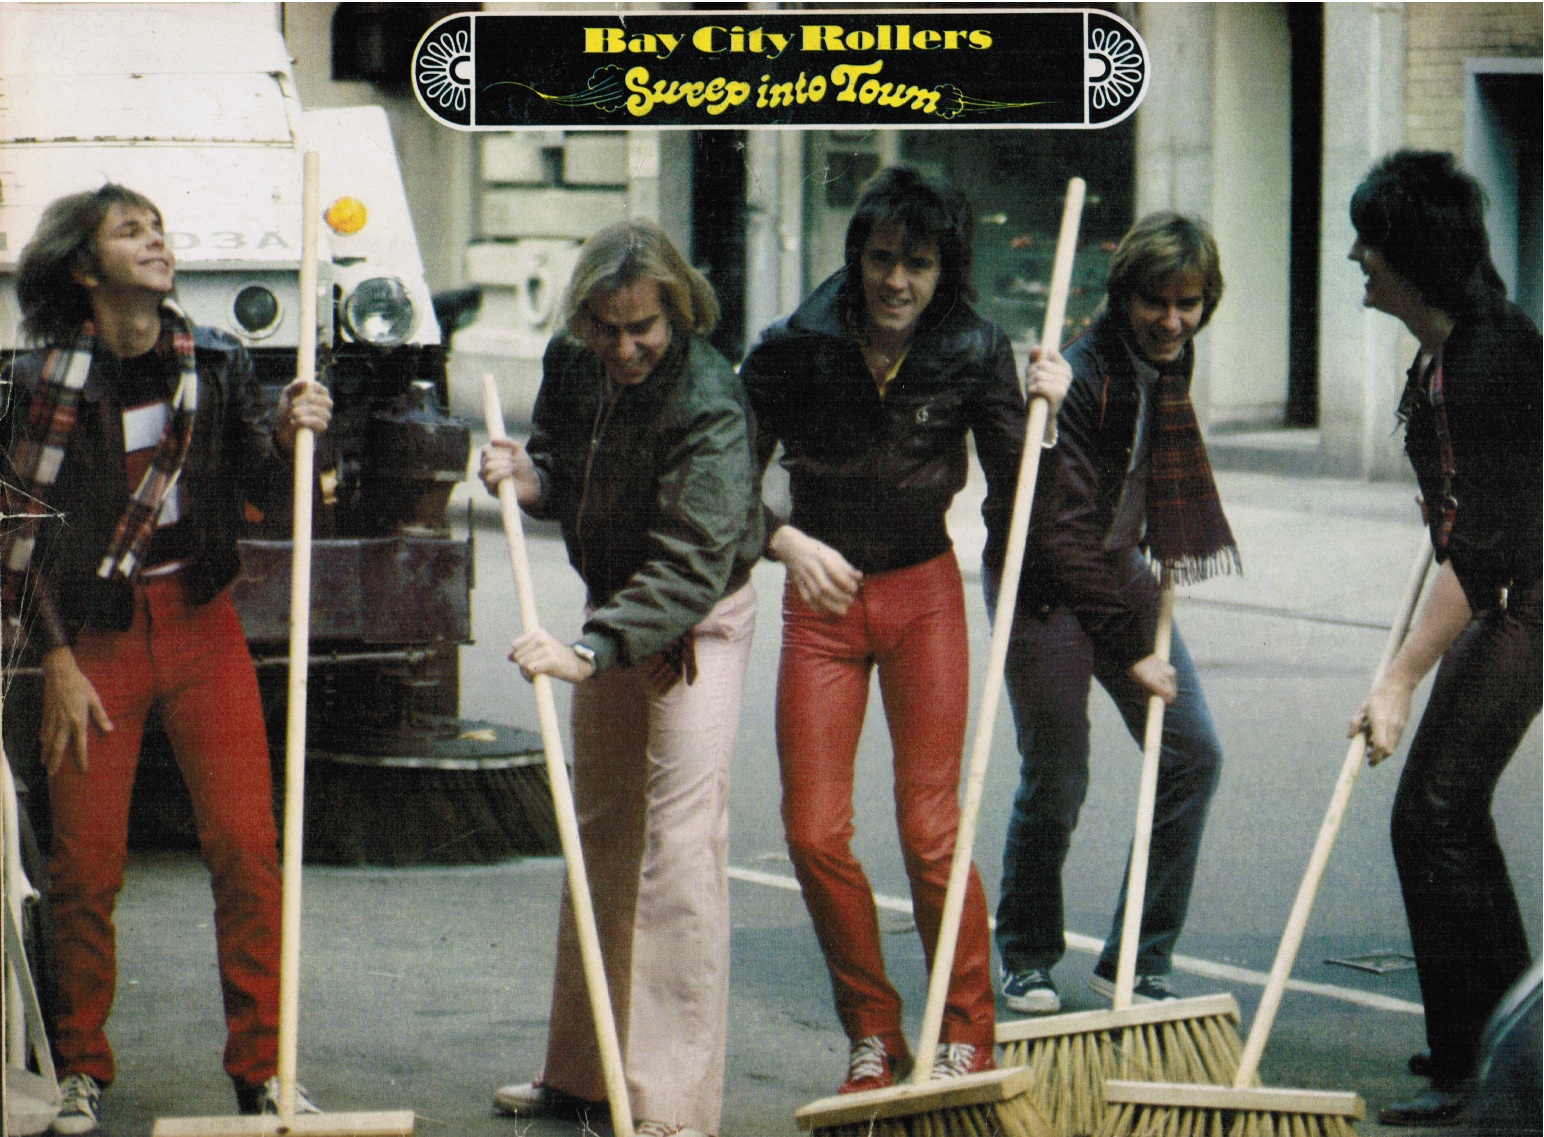 Mobile HD Wallpaper Bay City Rollers 